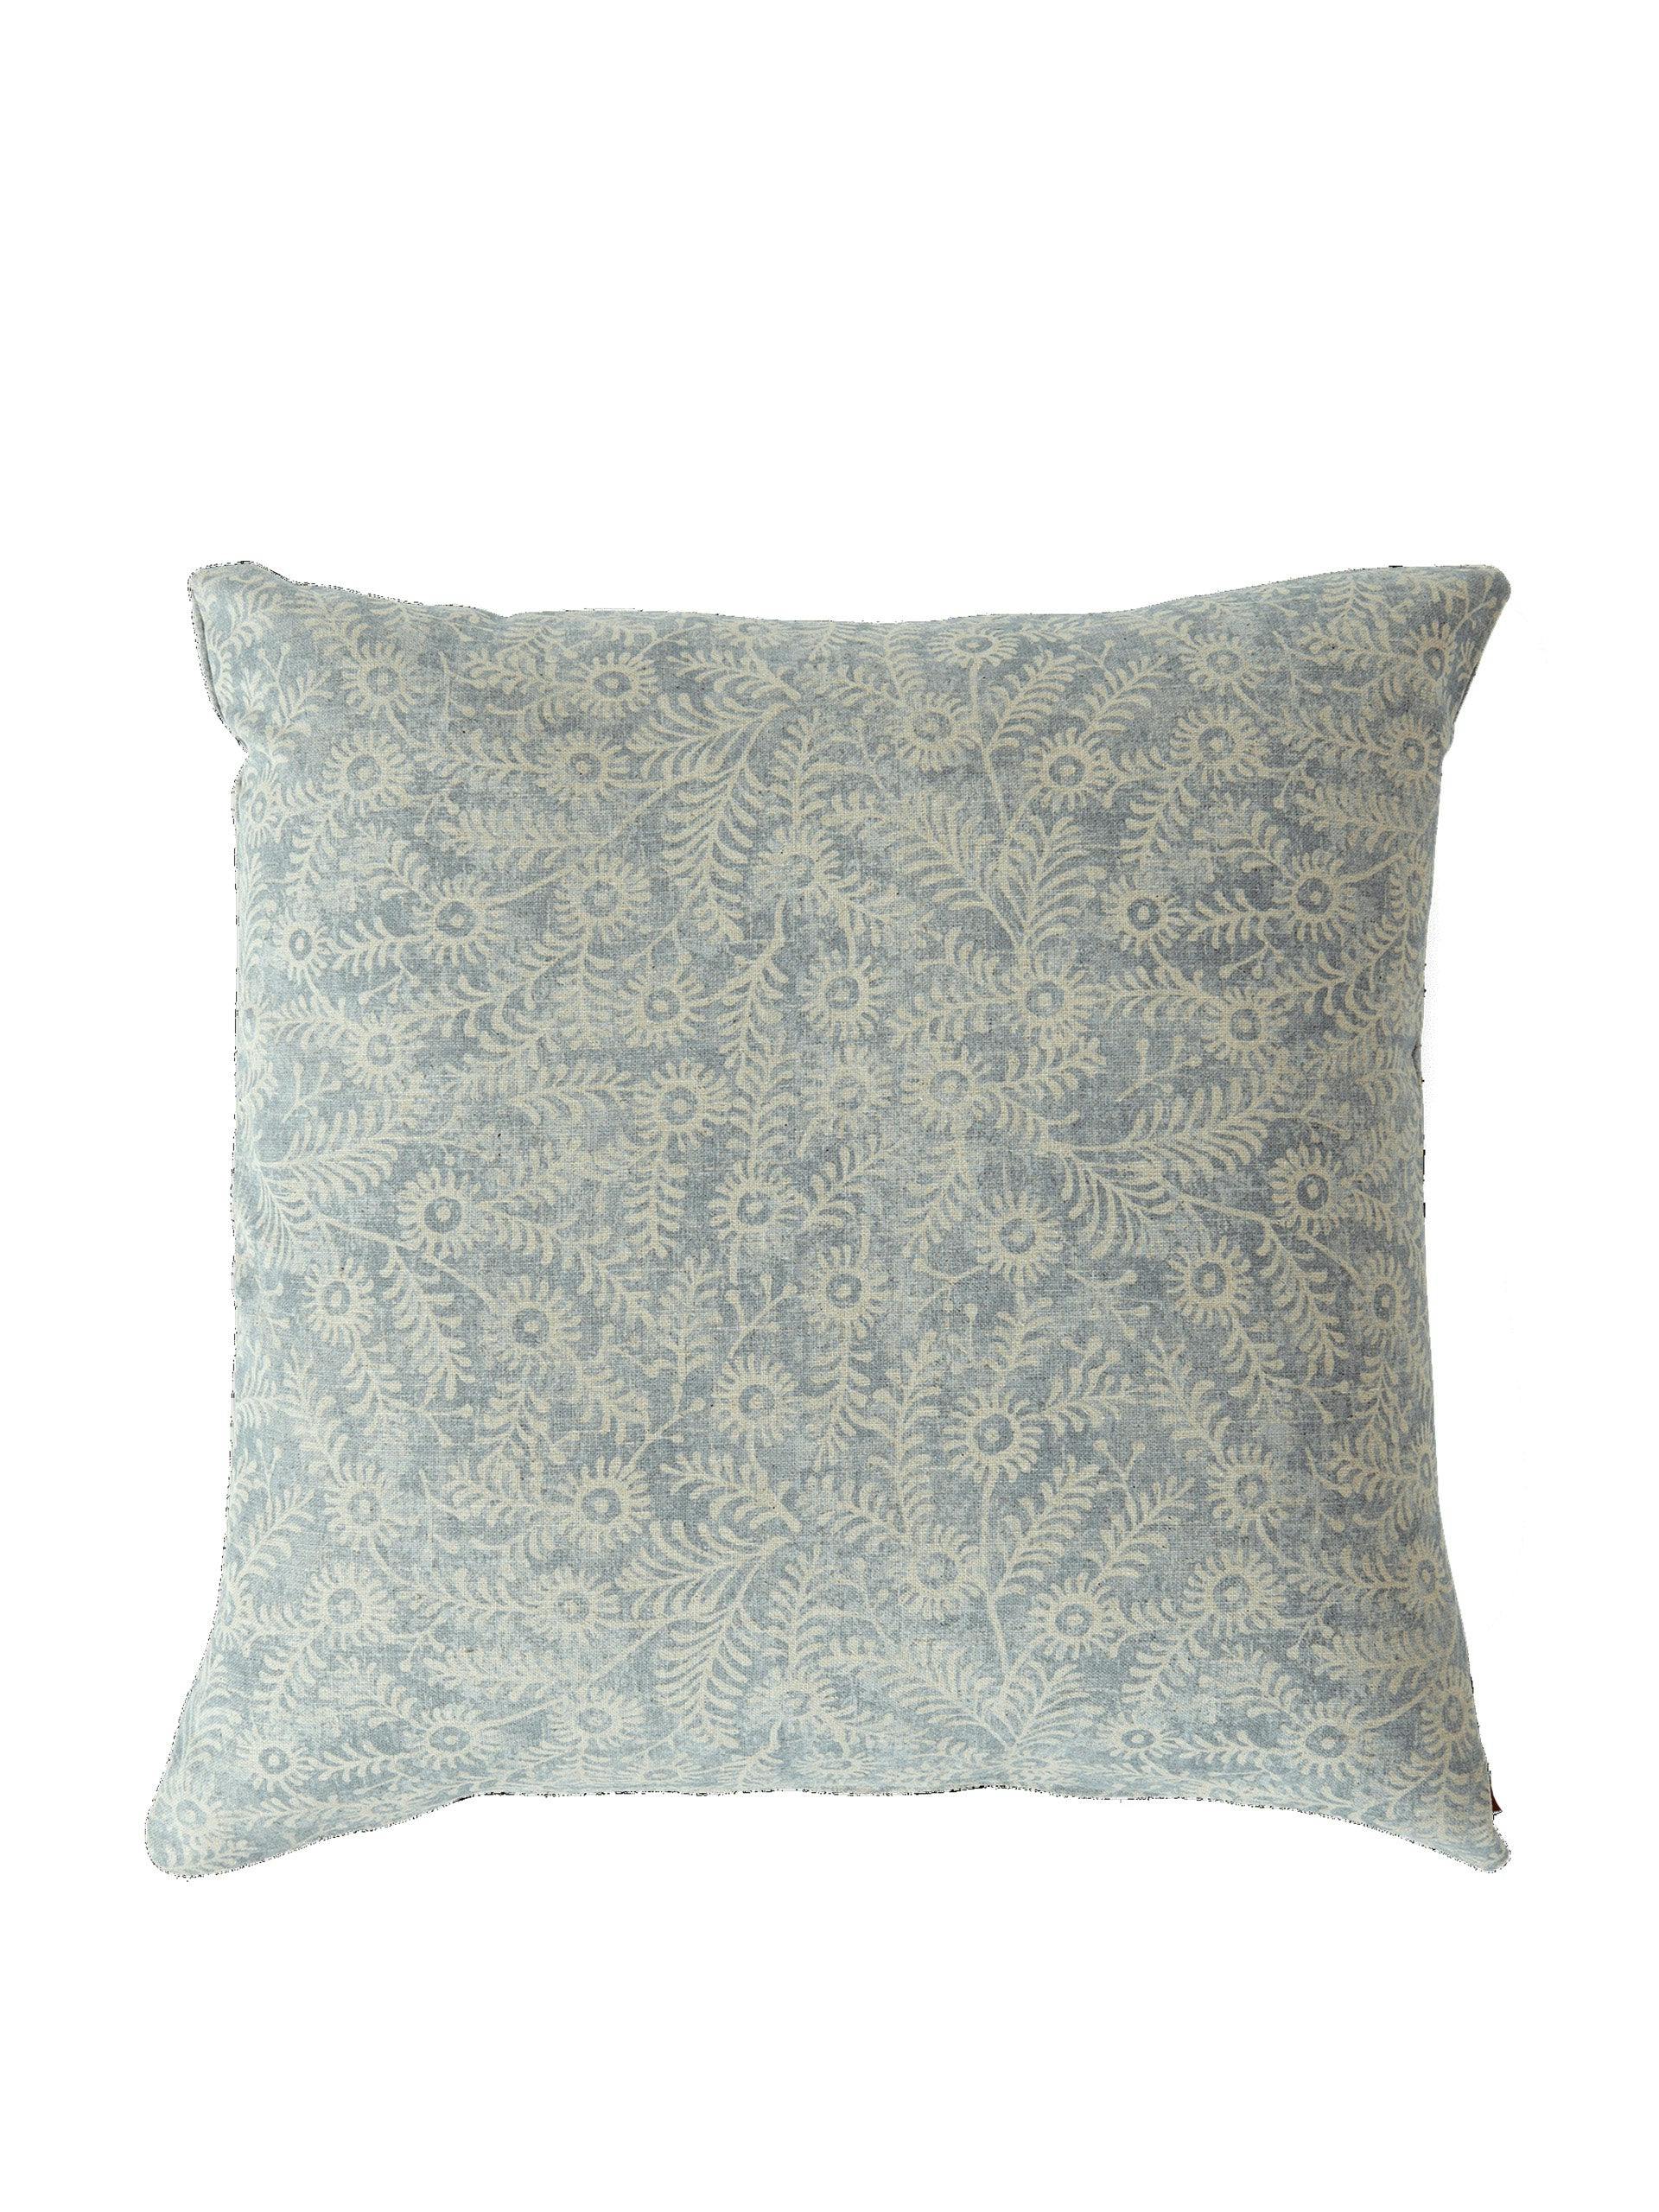 Large square cushion in blue